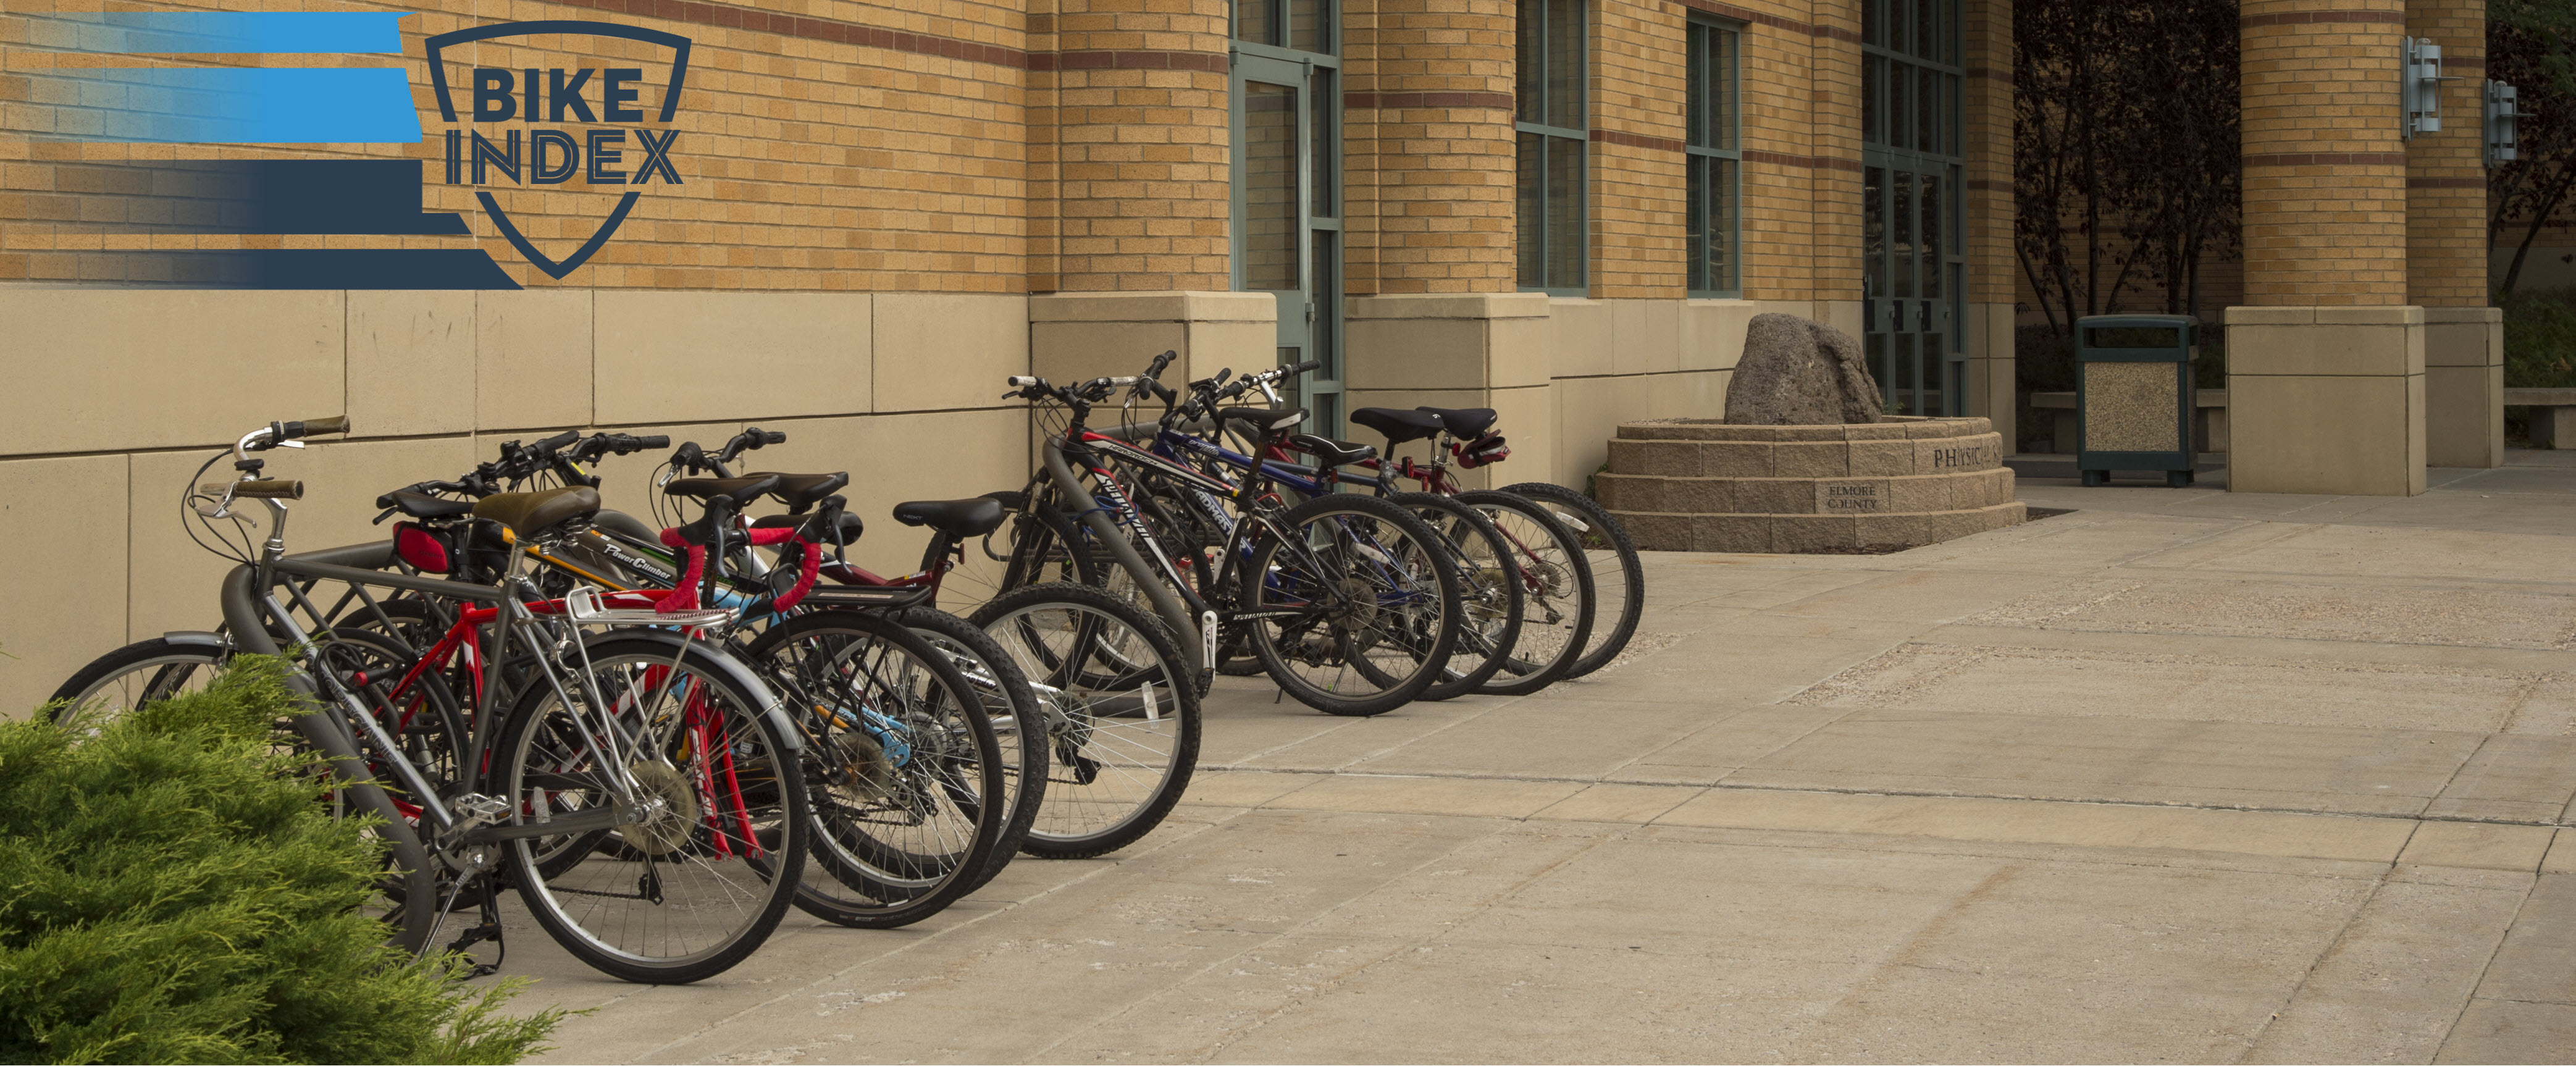 Bikes Outside Physical Science Building with Bike Index Logo